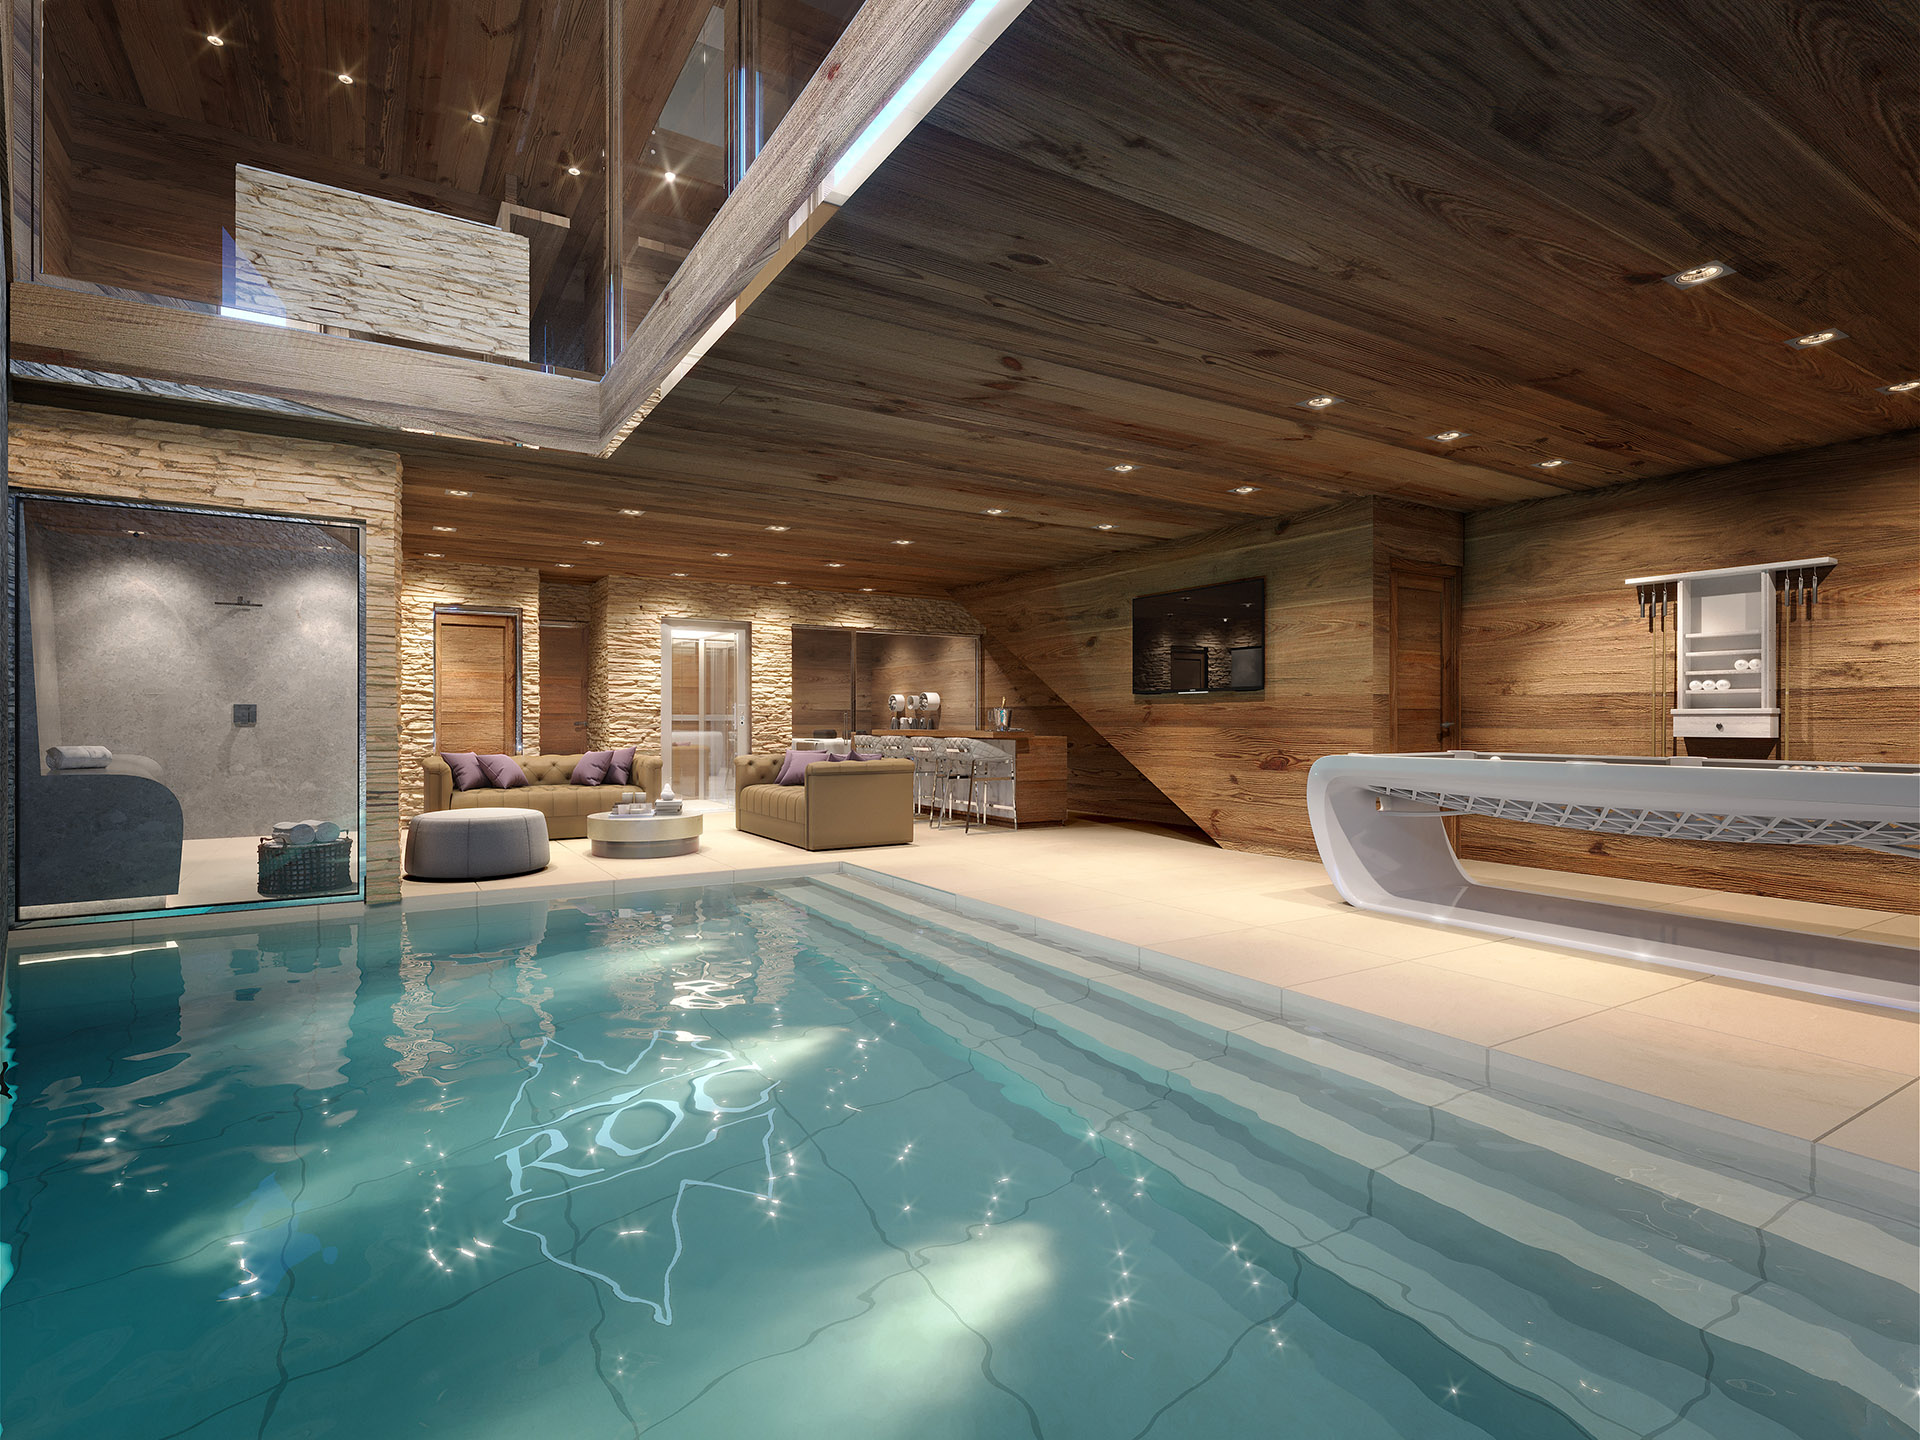 Photorealistic 3D representation of an indoor pool in a luxury chalet